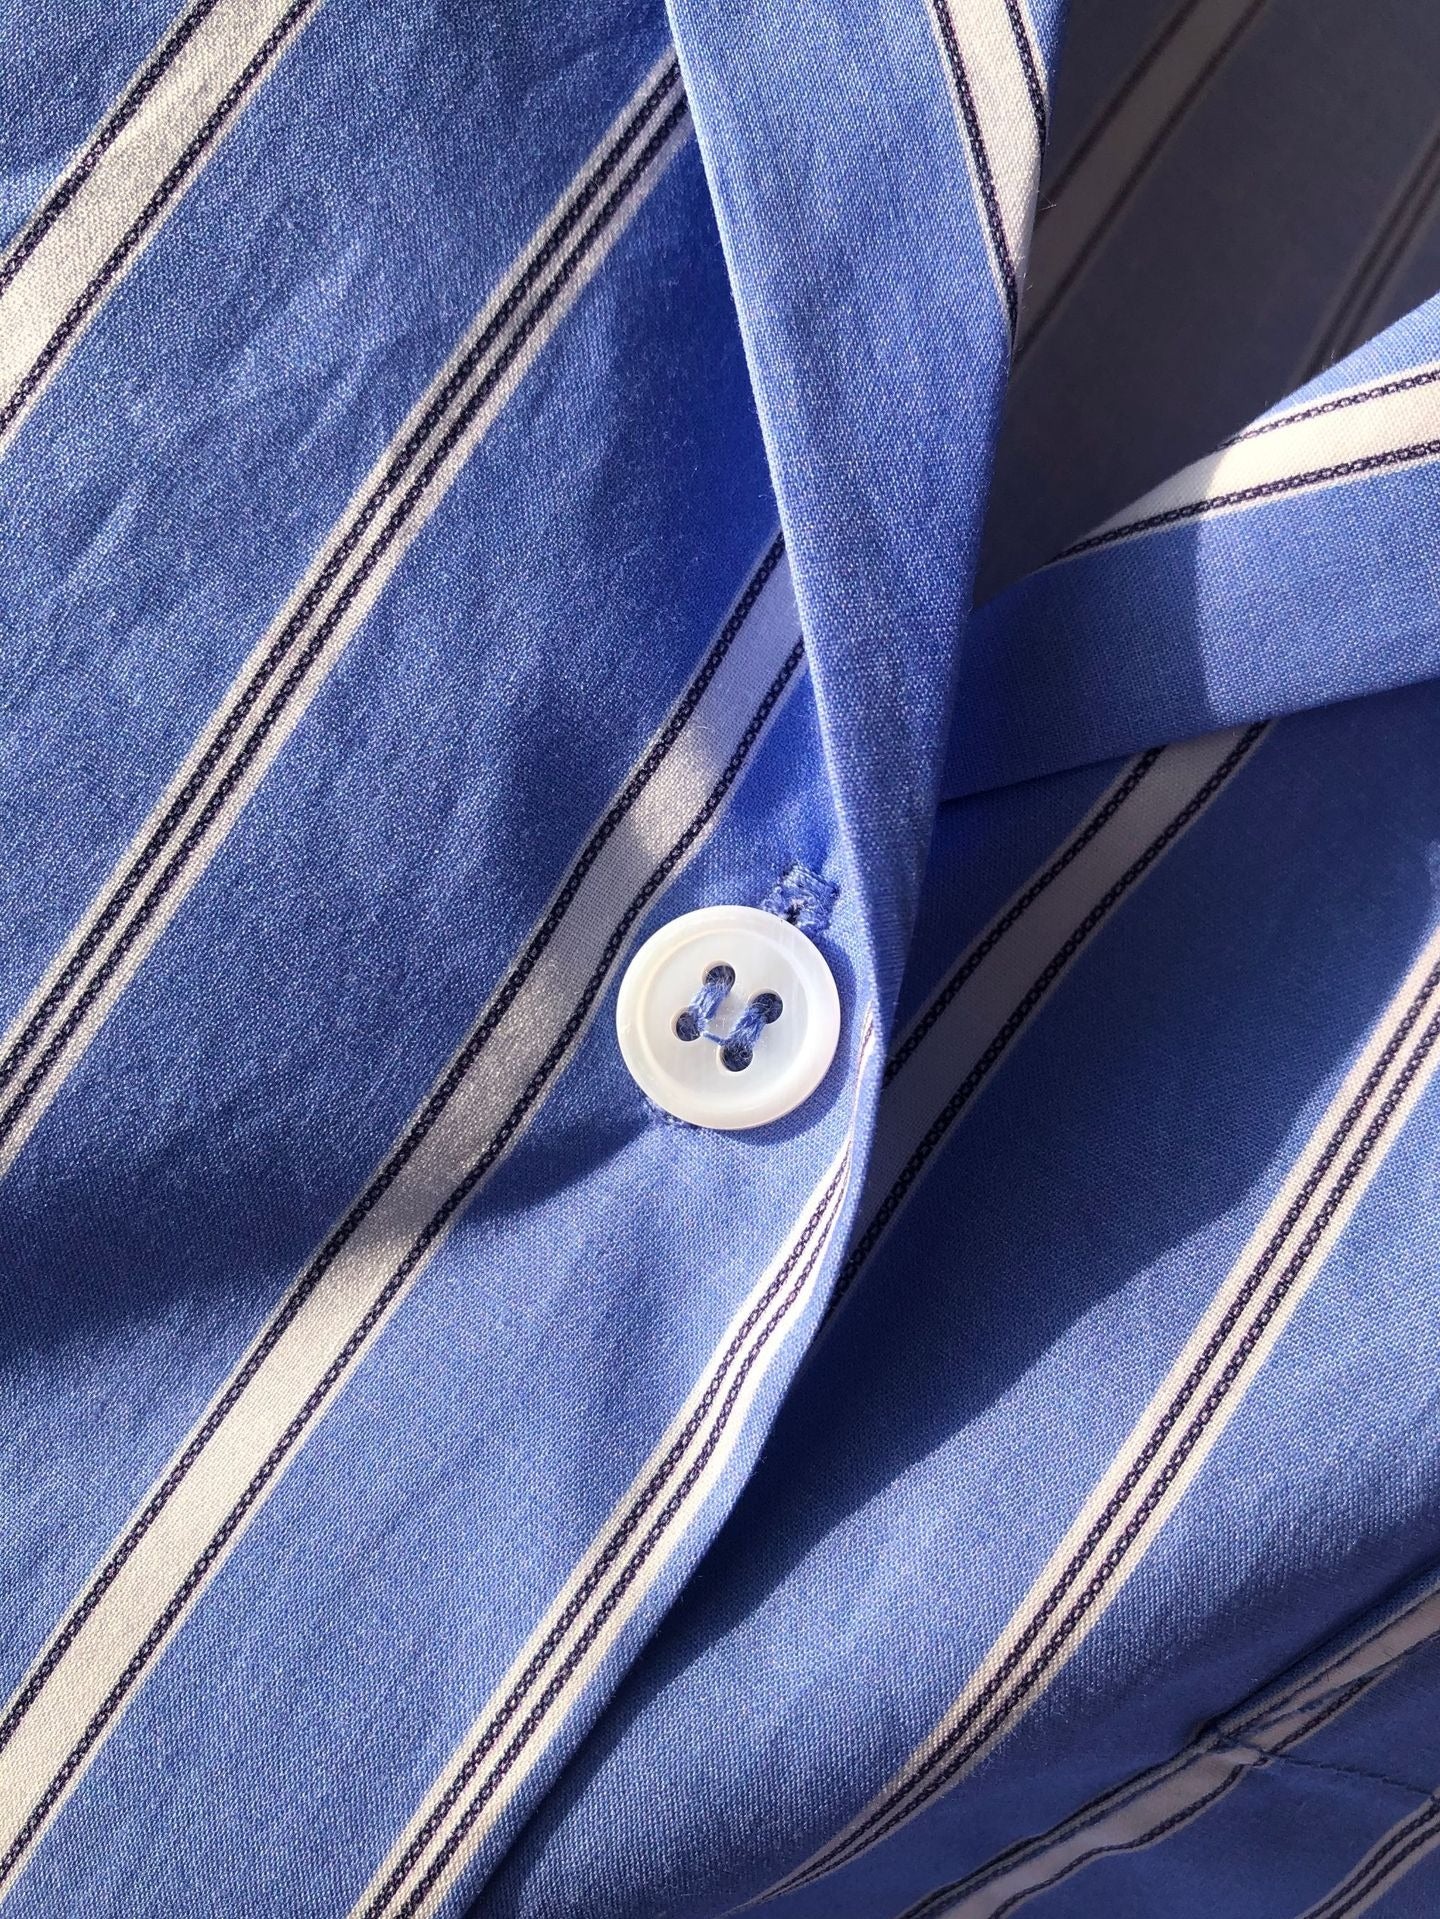 Blue & White Striped Cotton Shirt - by Gioventù